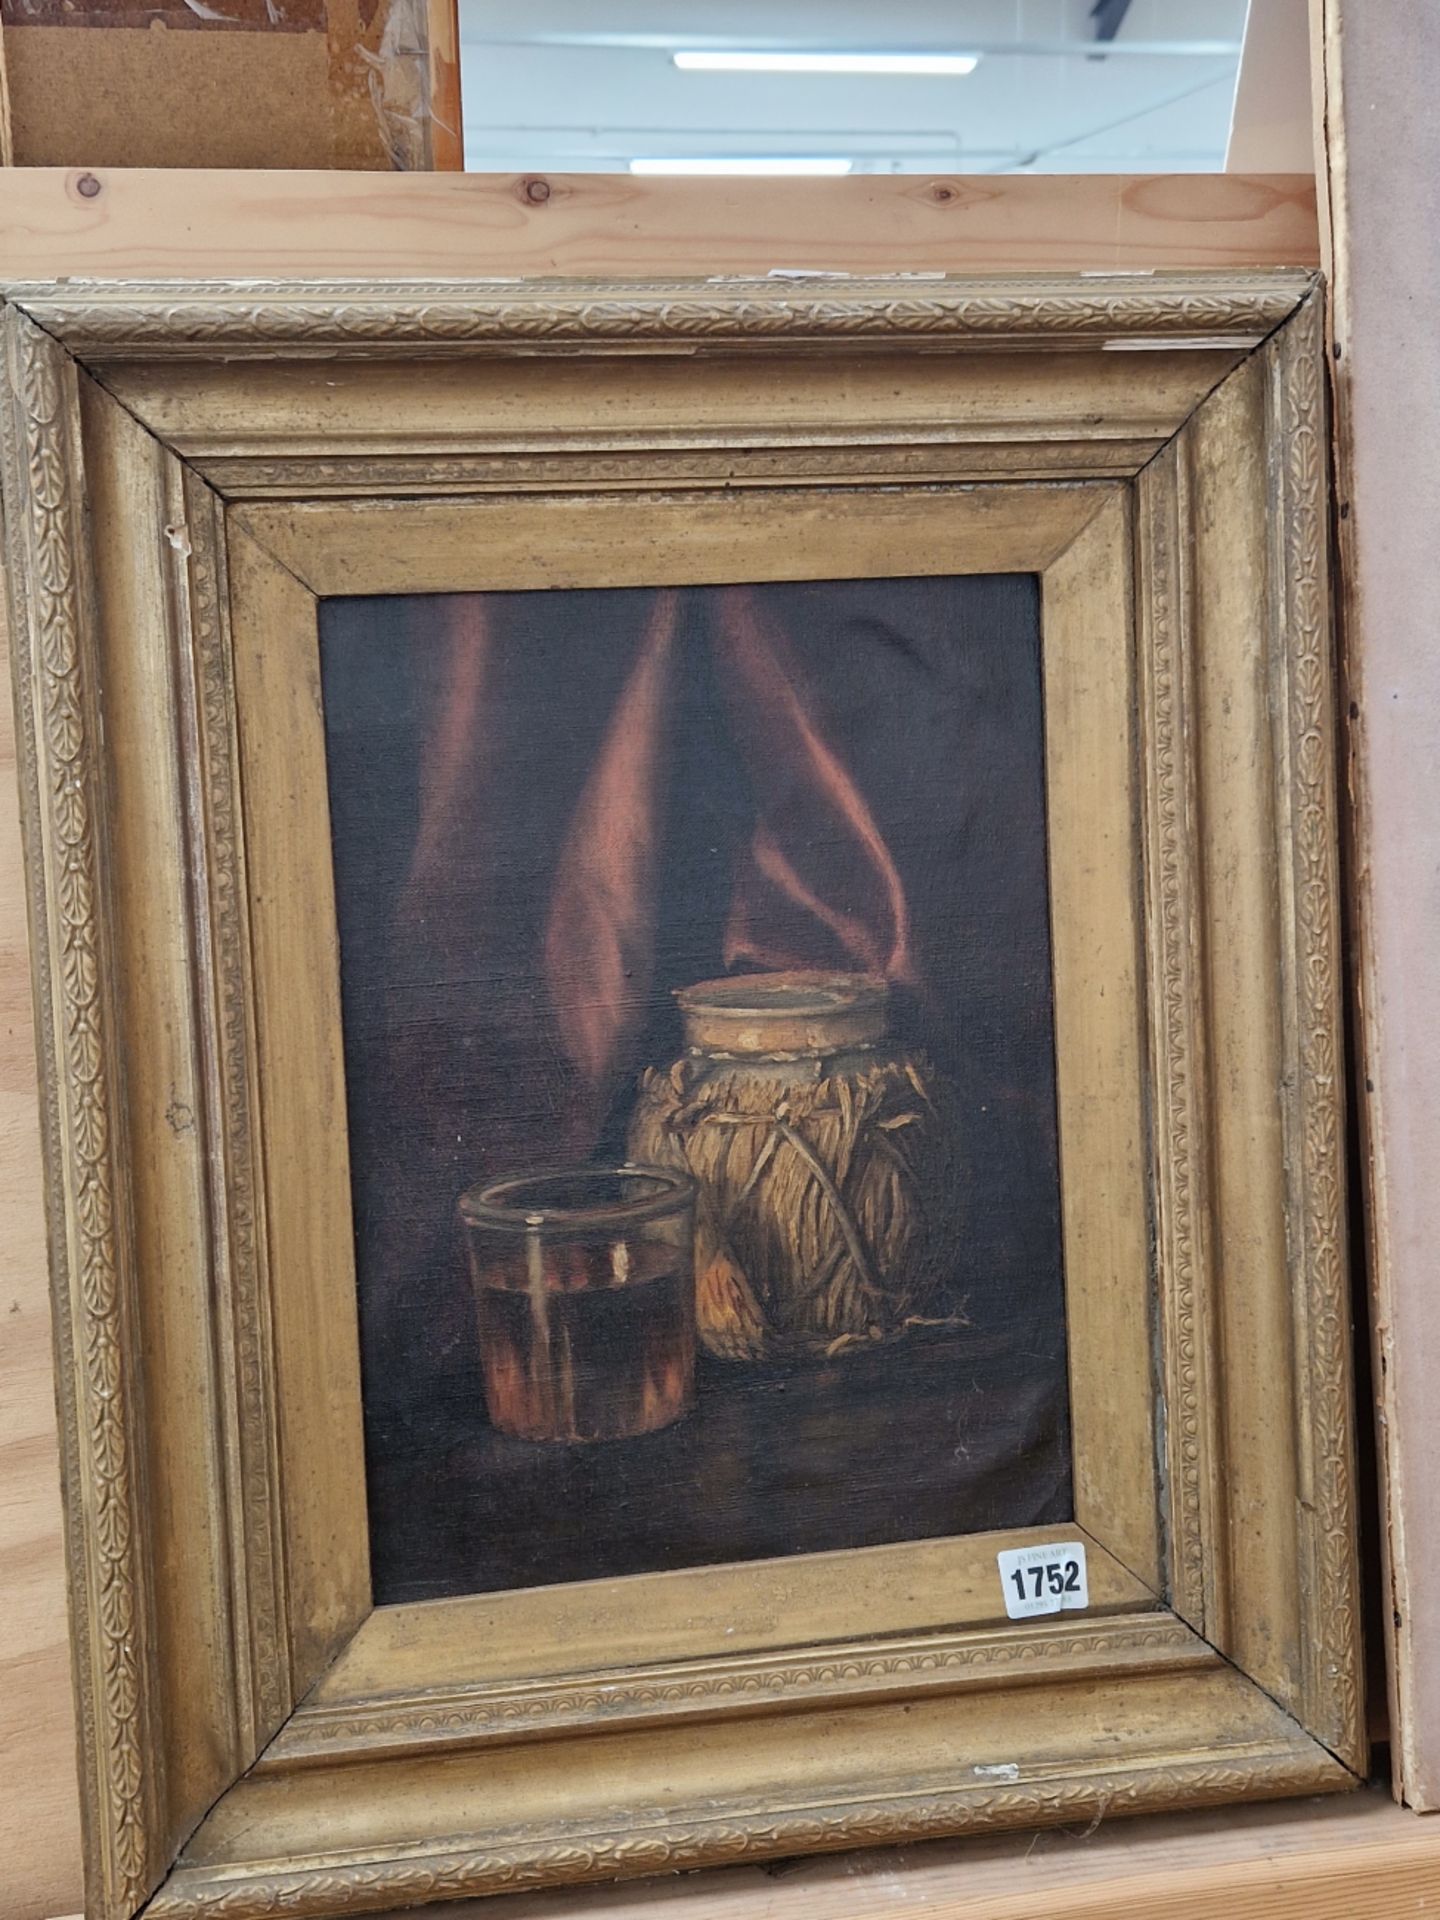 EARLY 20th CENTURY STILL LIFE PAINTING OF A GINGER JAR, OIL ON BOARD. 35 x 26cms - Image 2 of 2